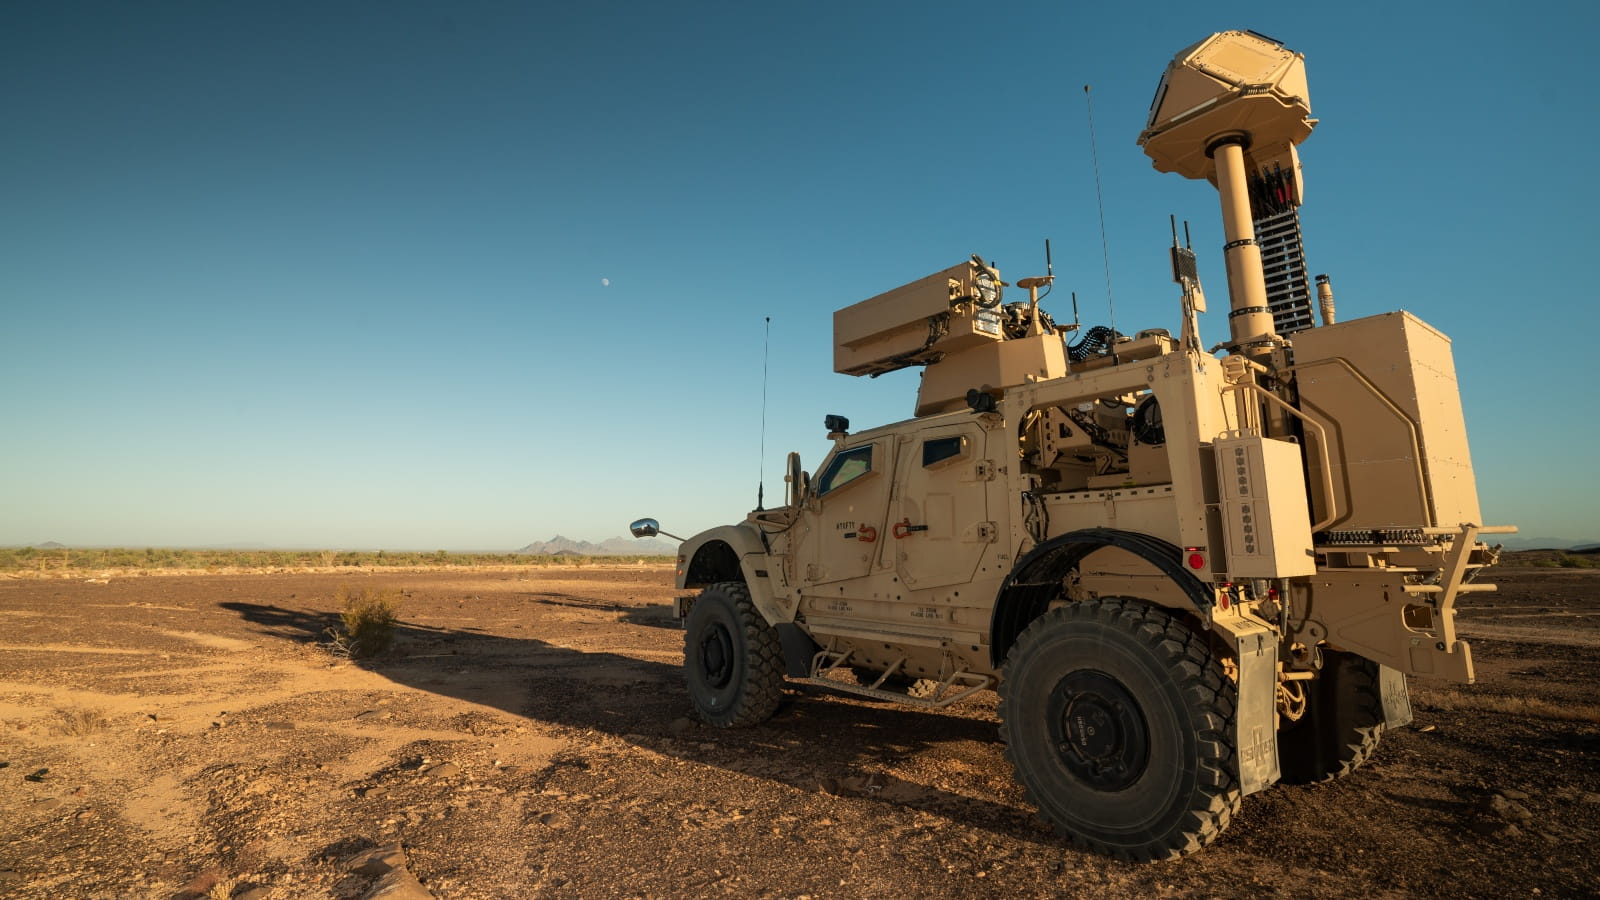 The Ku-band Radio Frequency System, or KuRFS, is a precision 360 degree, multi-mission radar ideally suited for Counter-UAS missions.